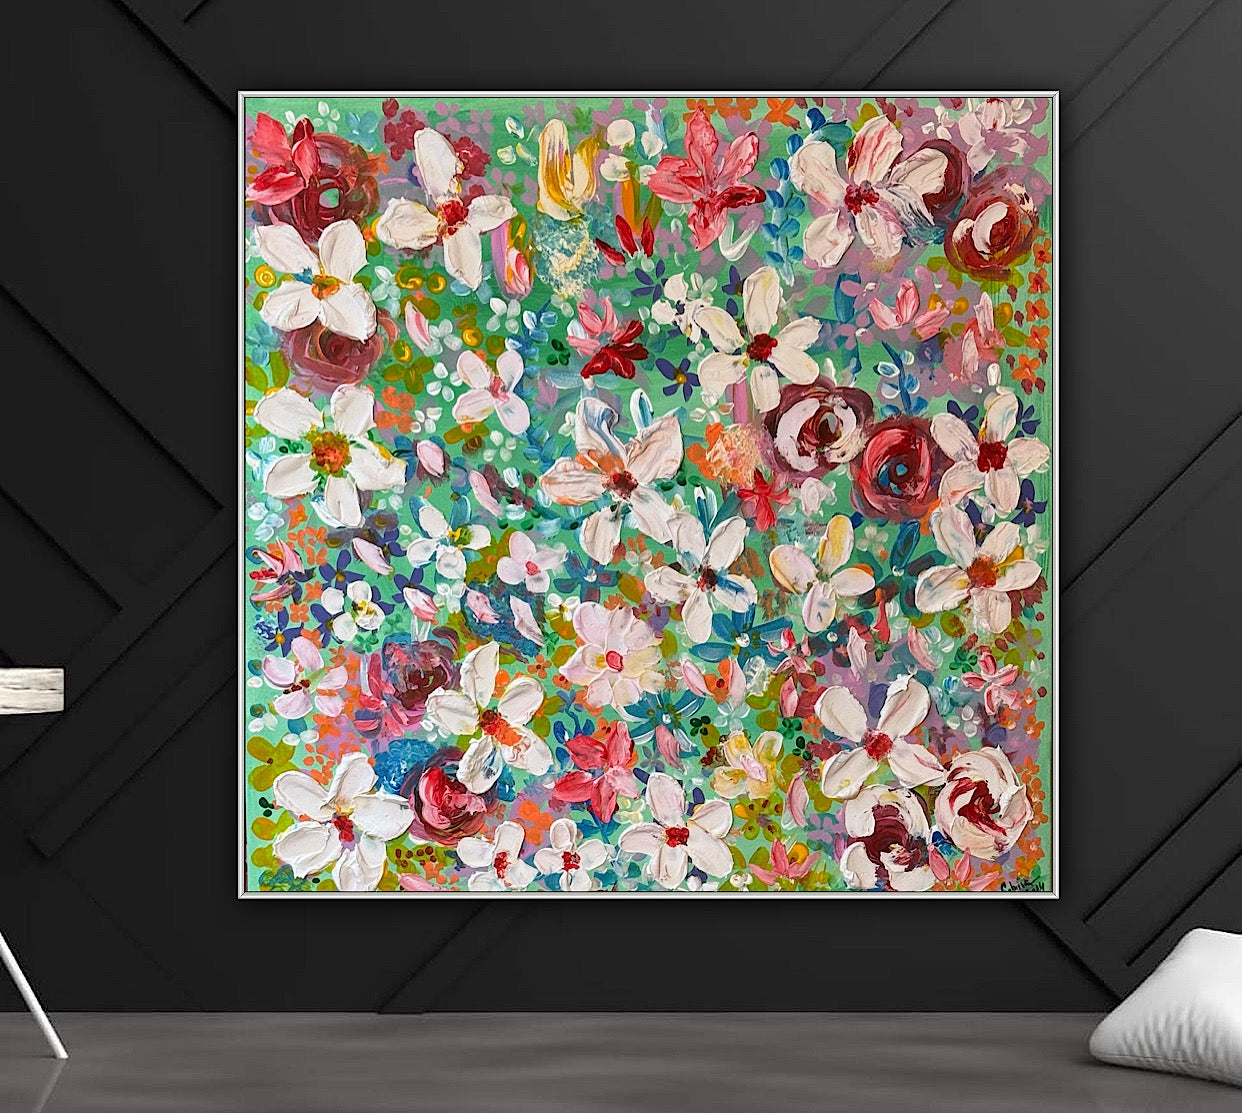 ‘Summer flowers  ’ in richter style abstract original oil painting 80 x 80cm